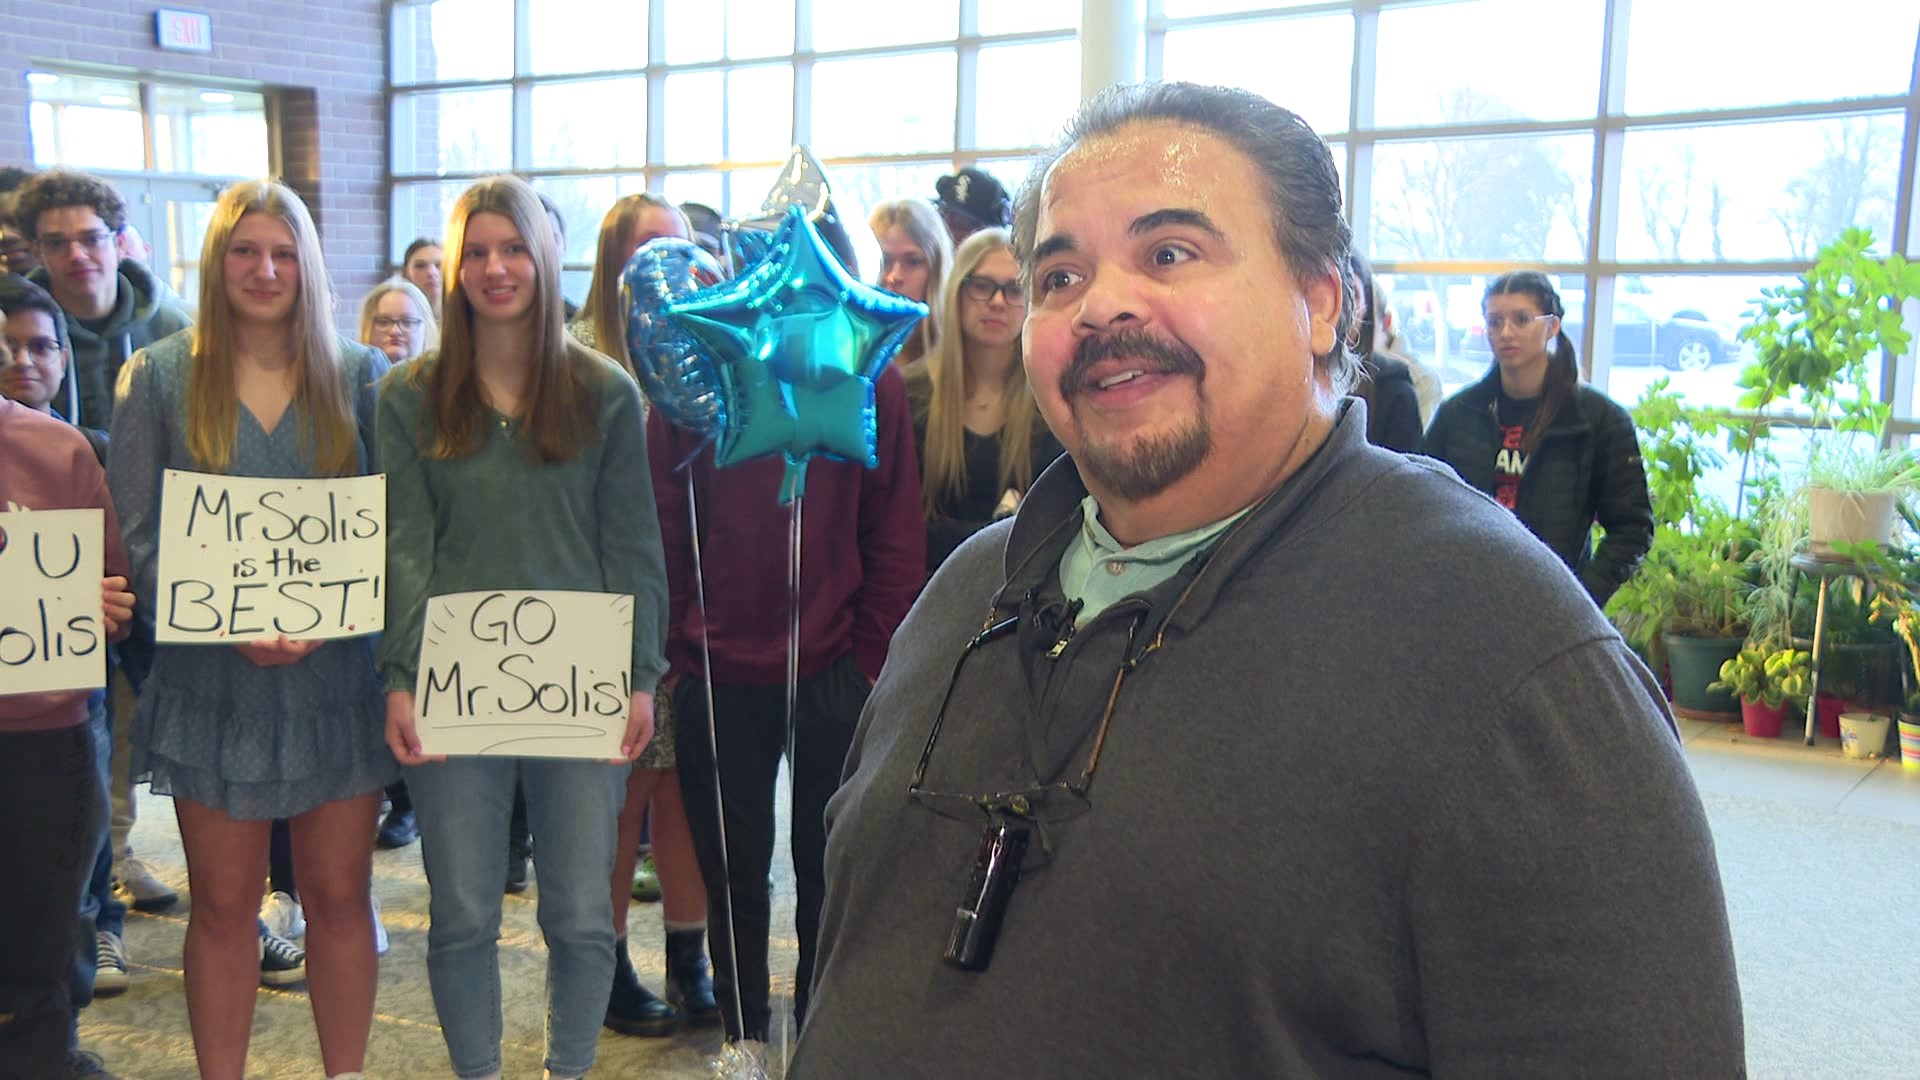 Turns out this Teacher of the Week is not a big fan of surprises—but that didn’t stop the celebration.